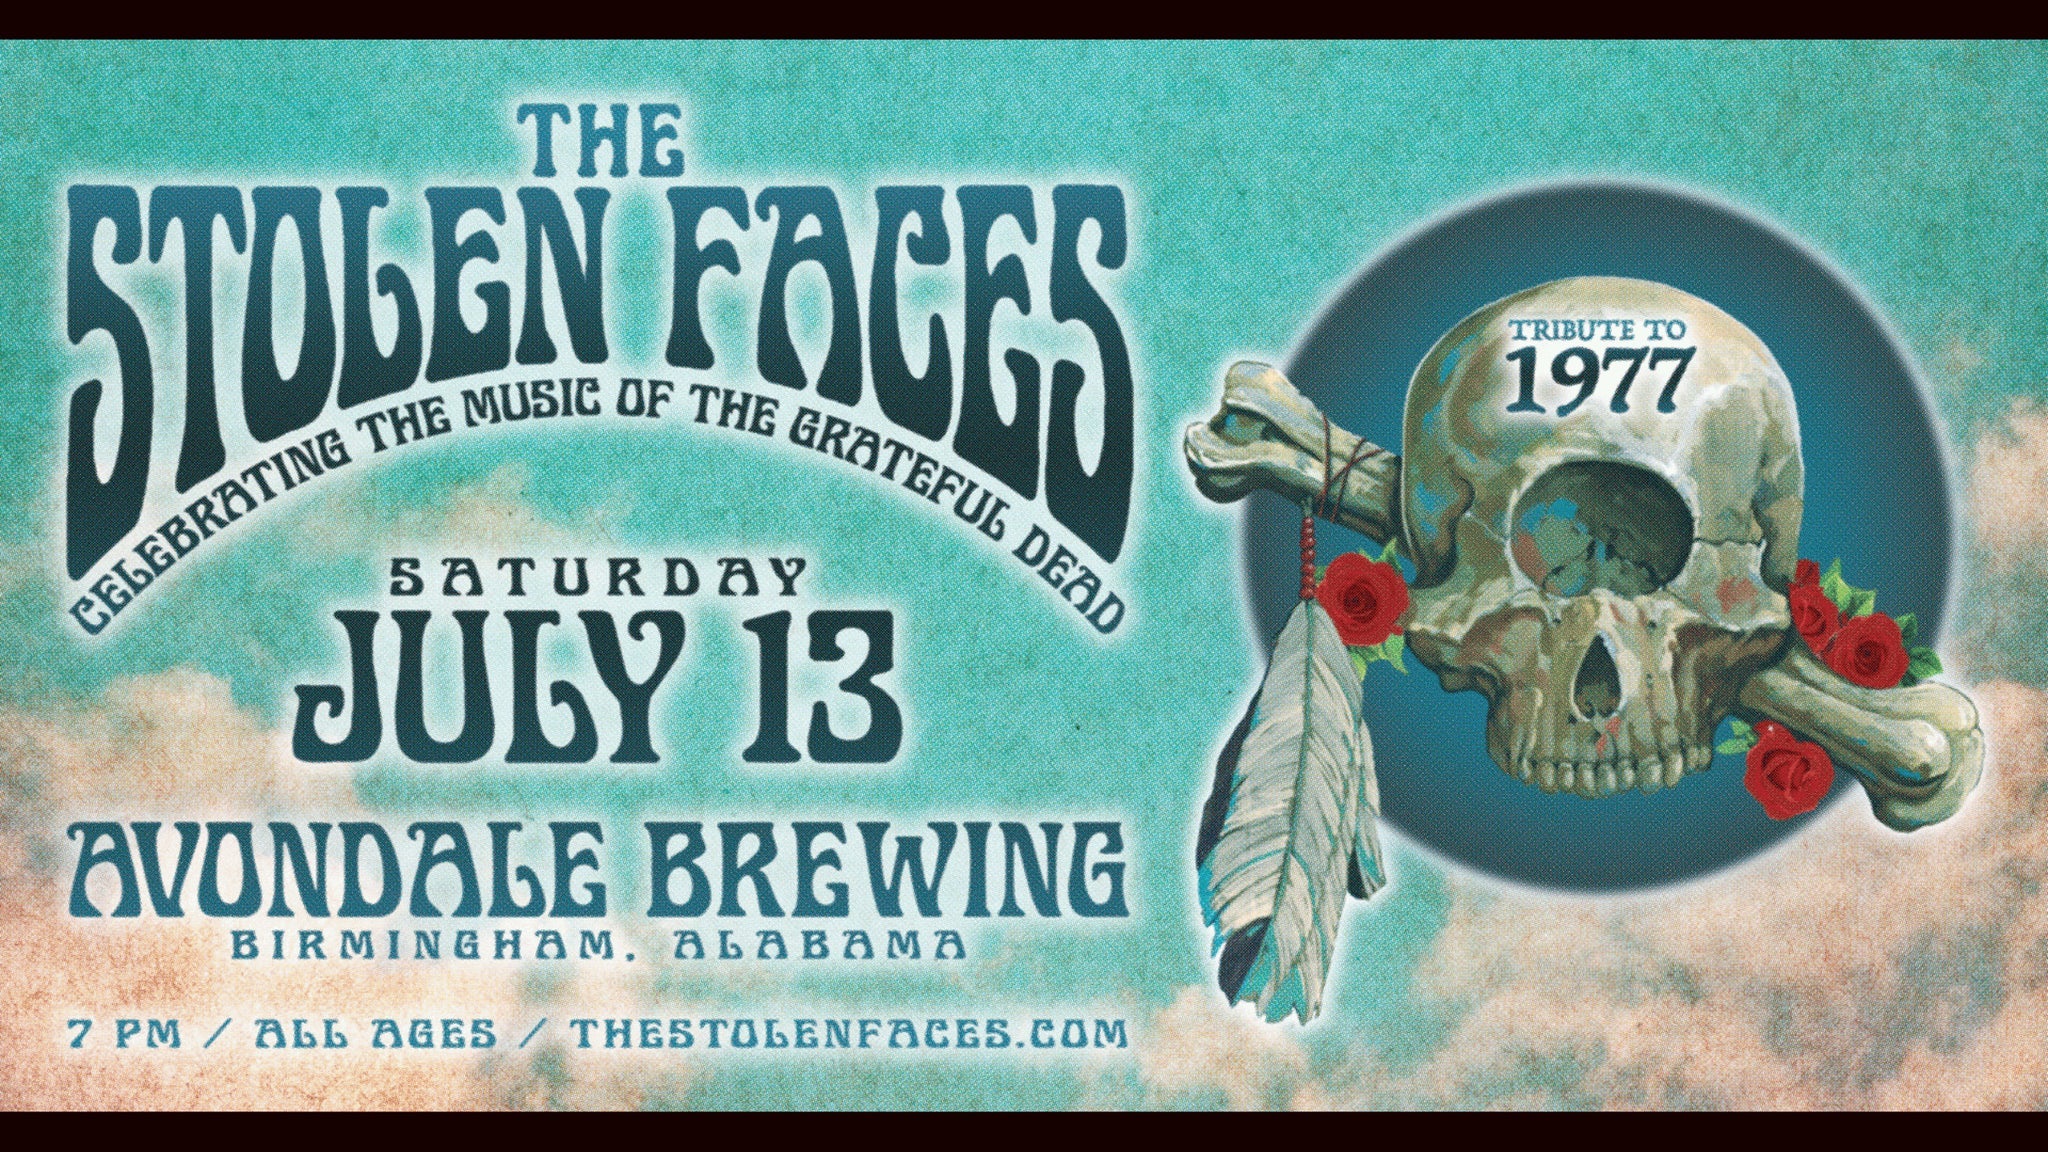 The Stolen Faces: Tribute to 1977 at Avondale Brewing Co.